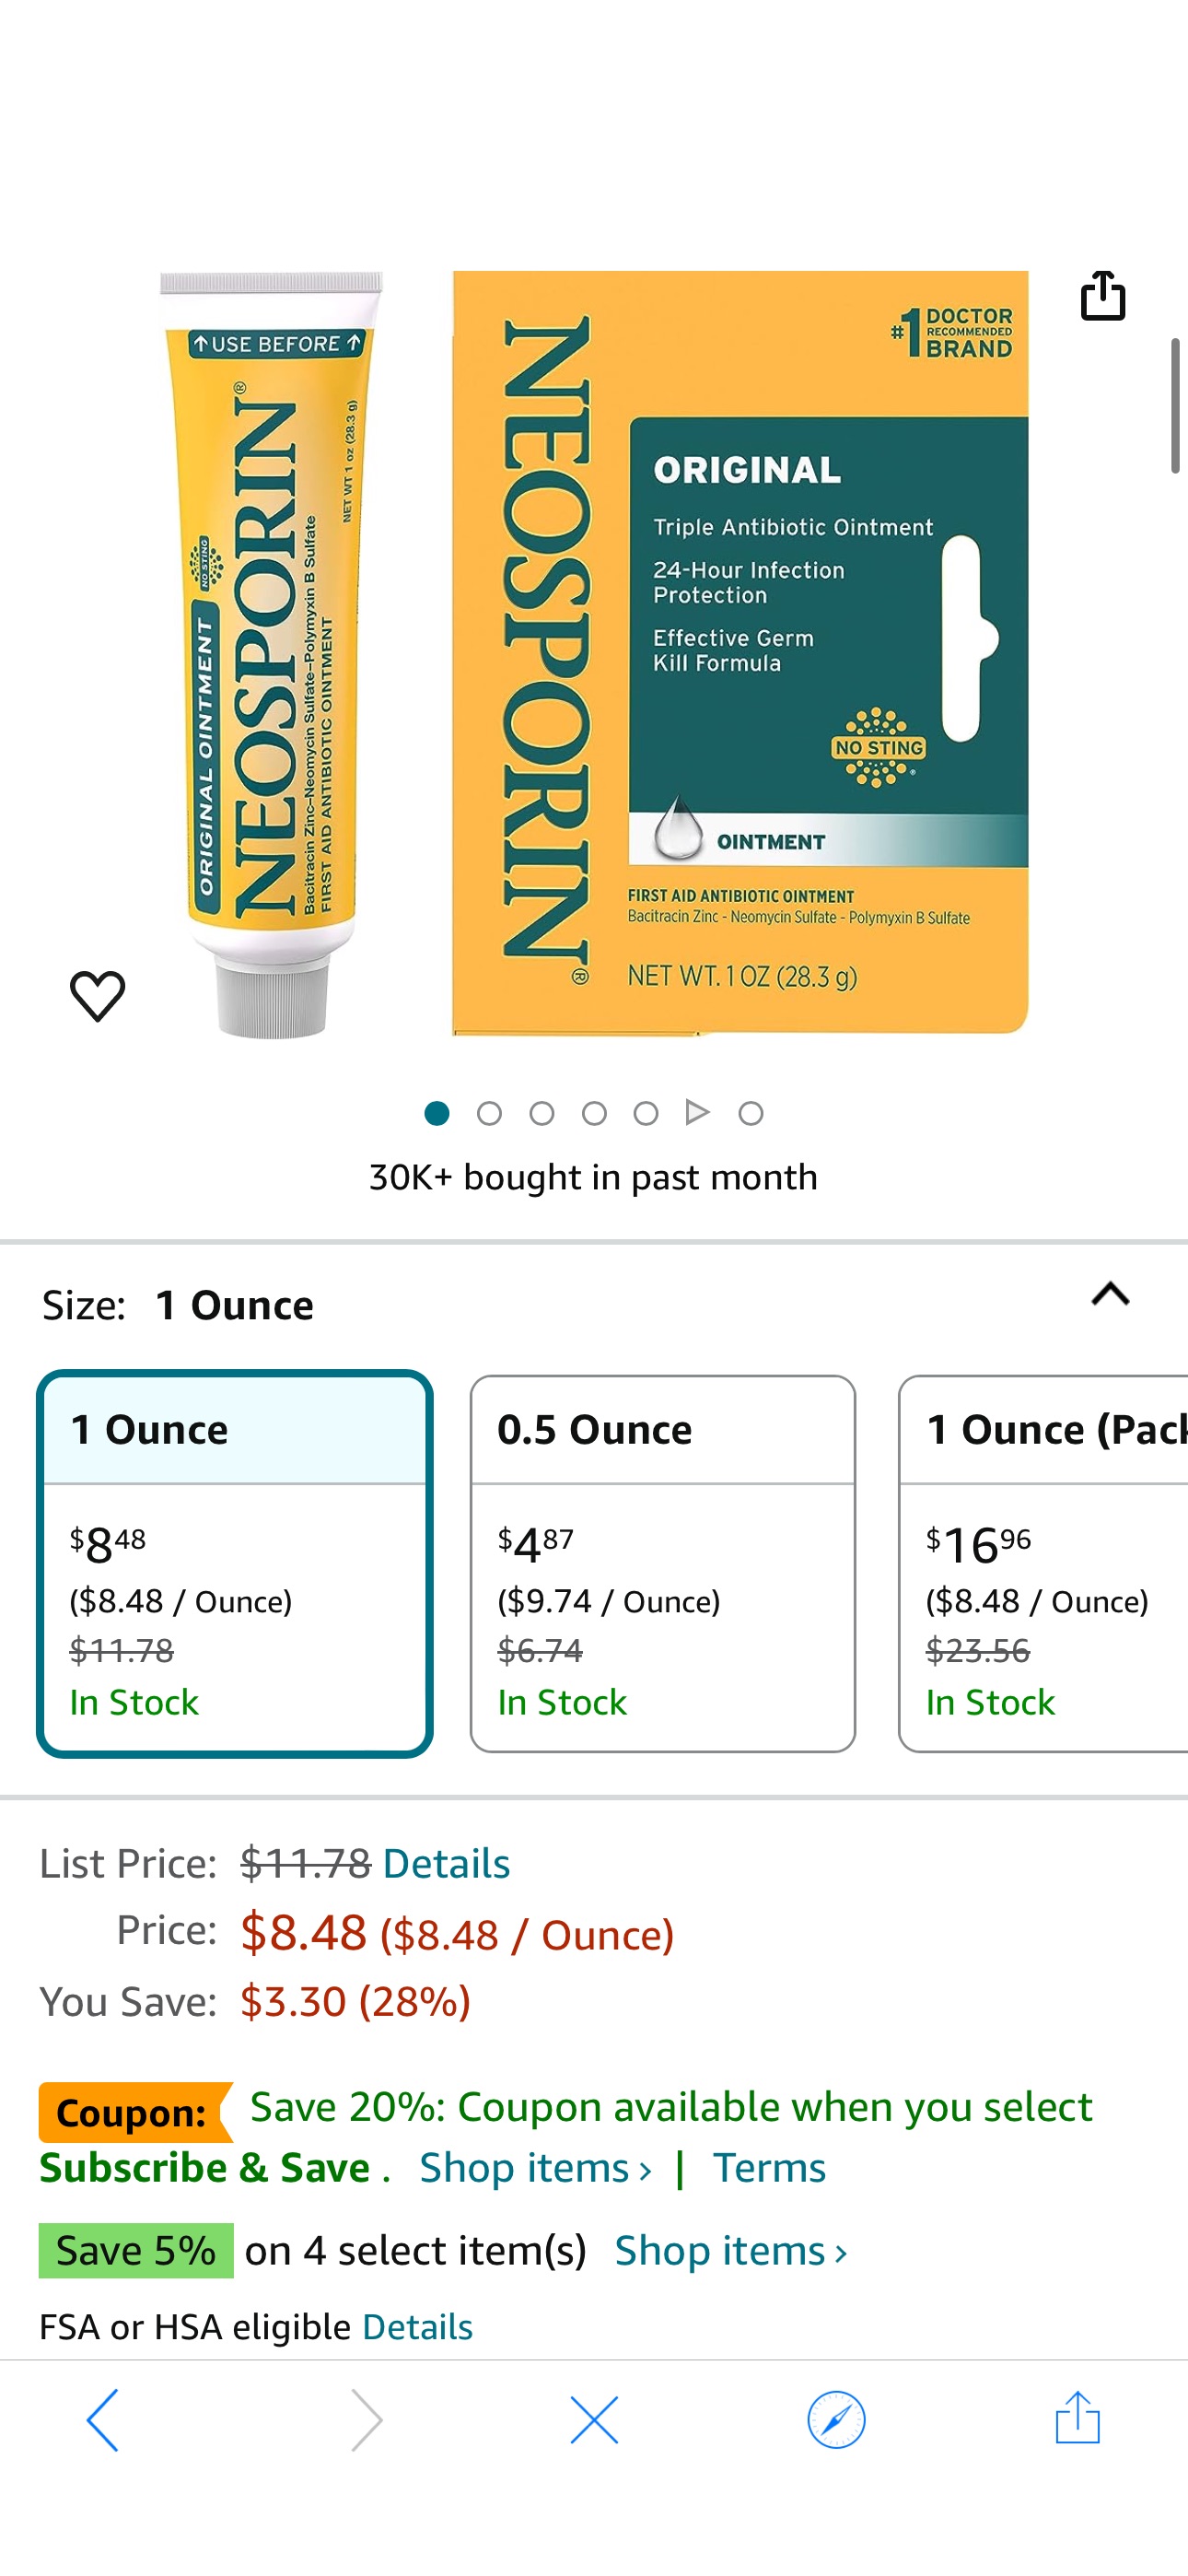 Amazon.com: Neosporin Original Antibiotic Ointment, 24-Hour Infection Prevention for Minor Wound, 1 oz : Health & Household